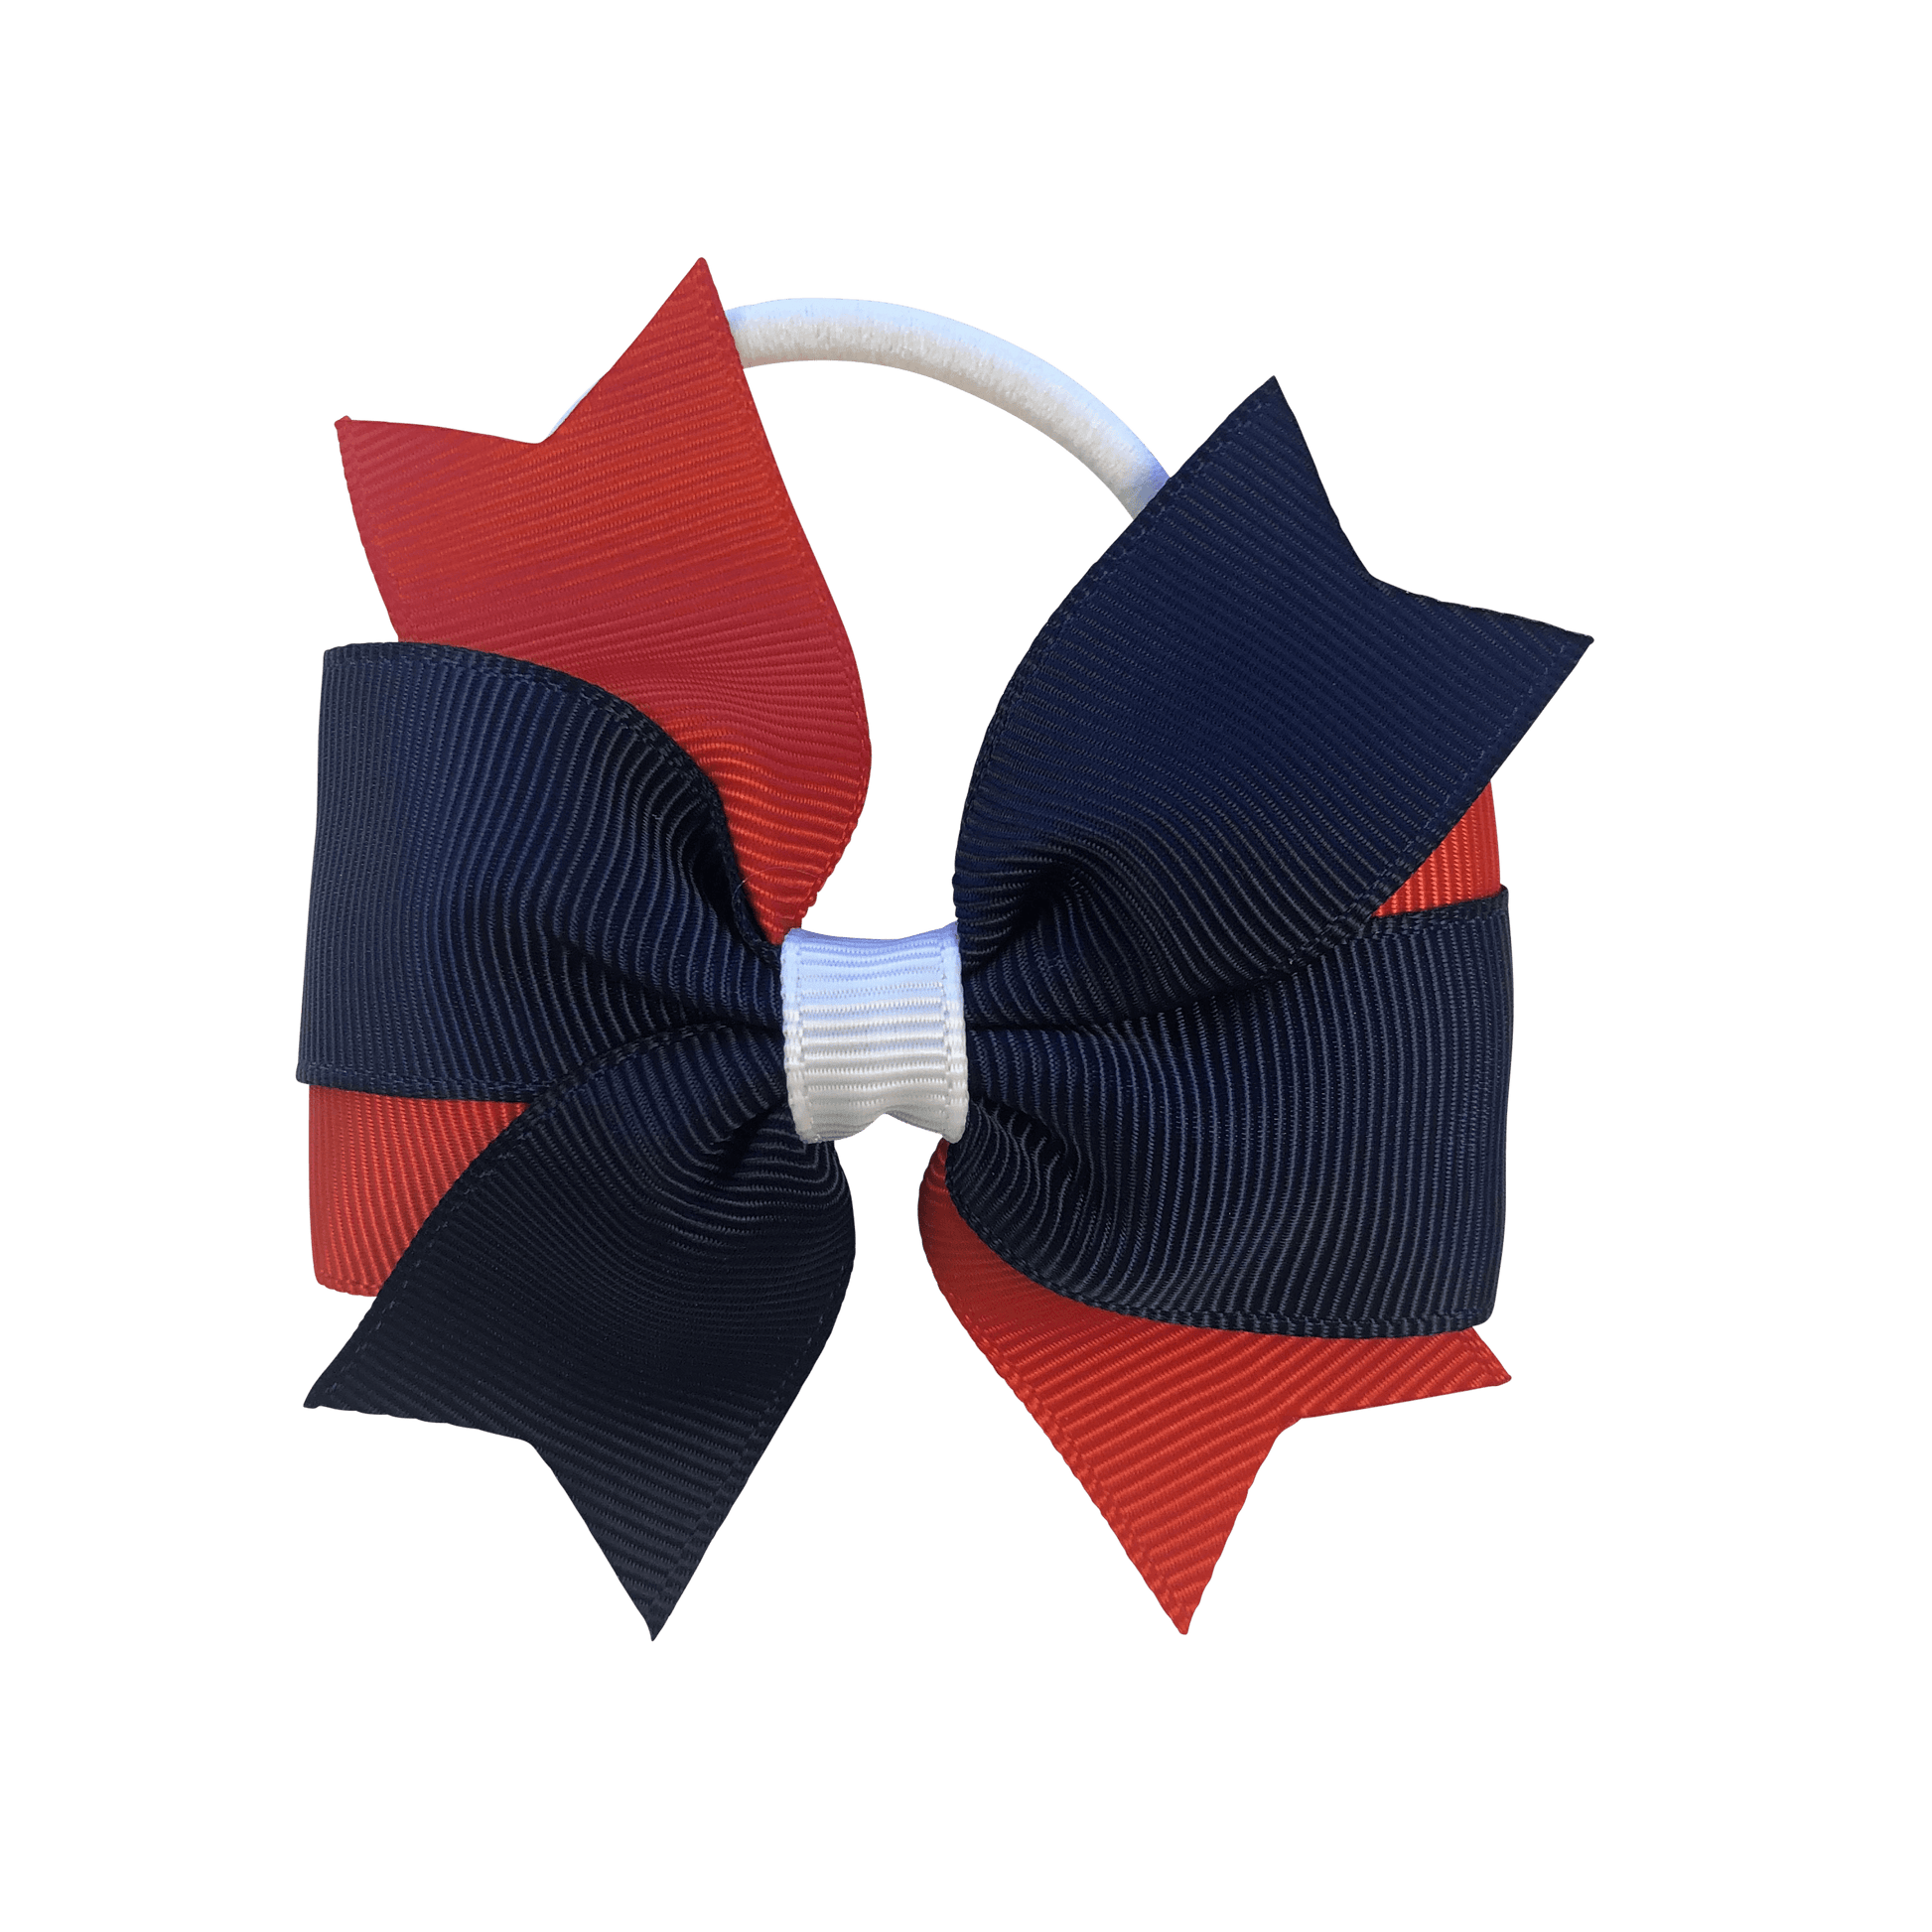 Red & Navy & White Hair Accessories - Assorted Hair Accessories - School Uniform Hair Accessories - Ponytails and Fairytales